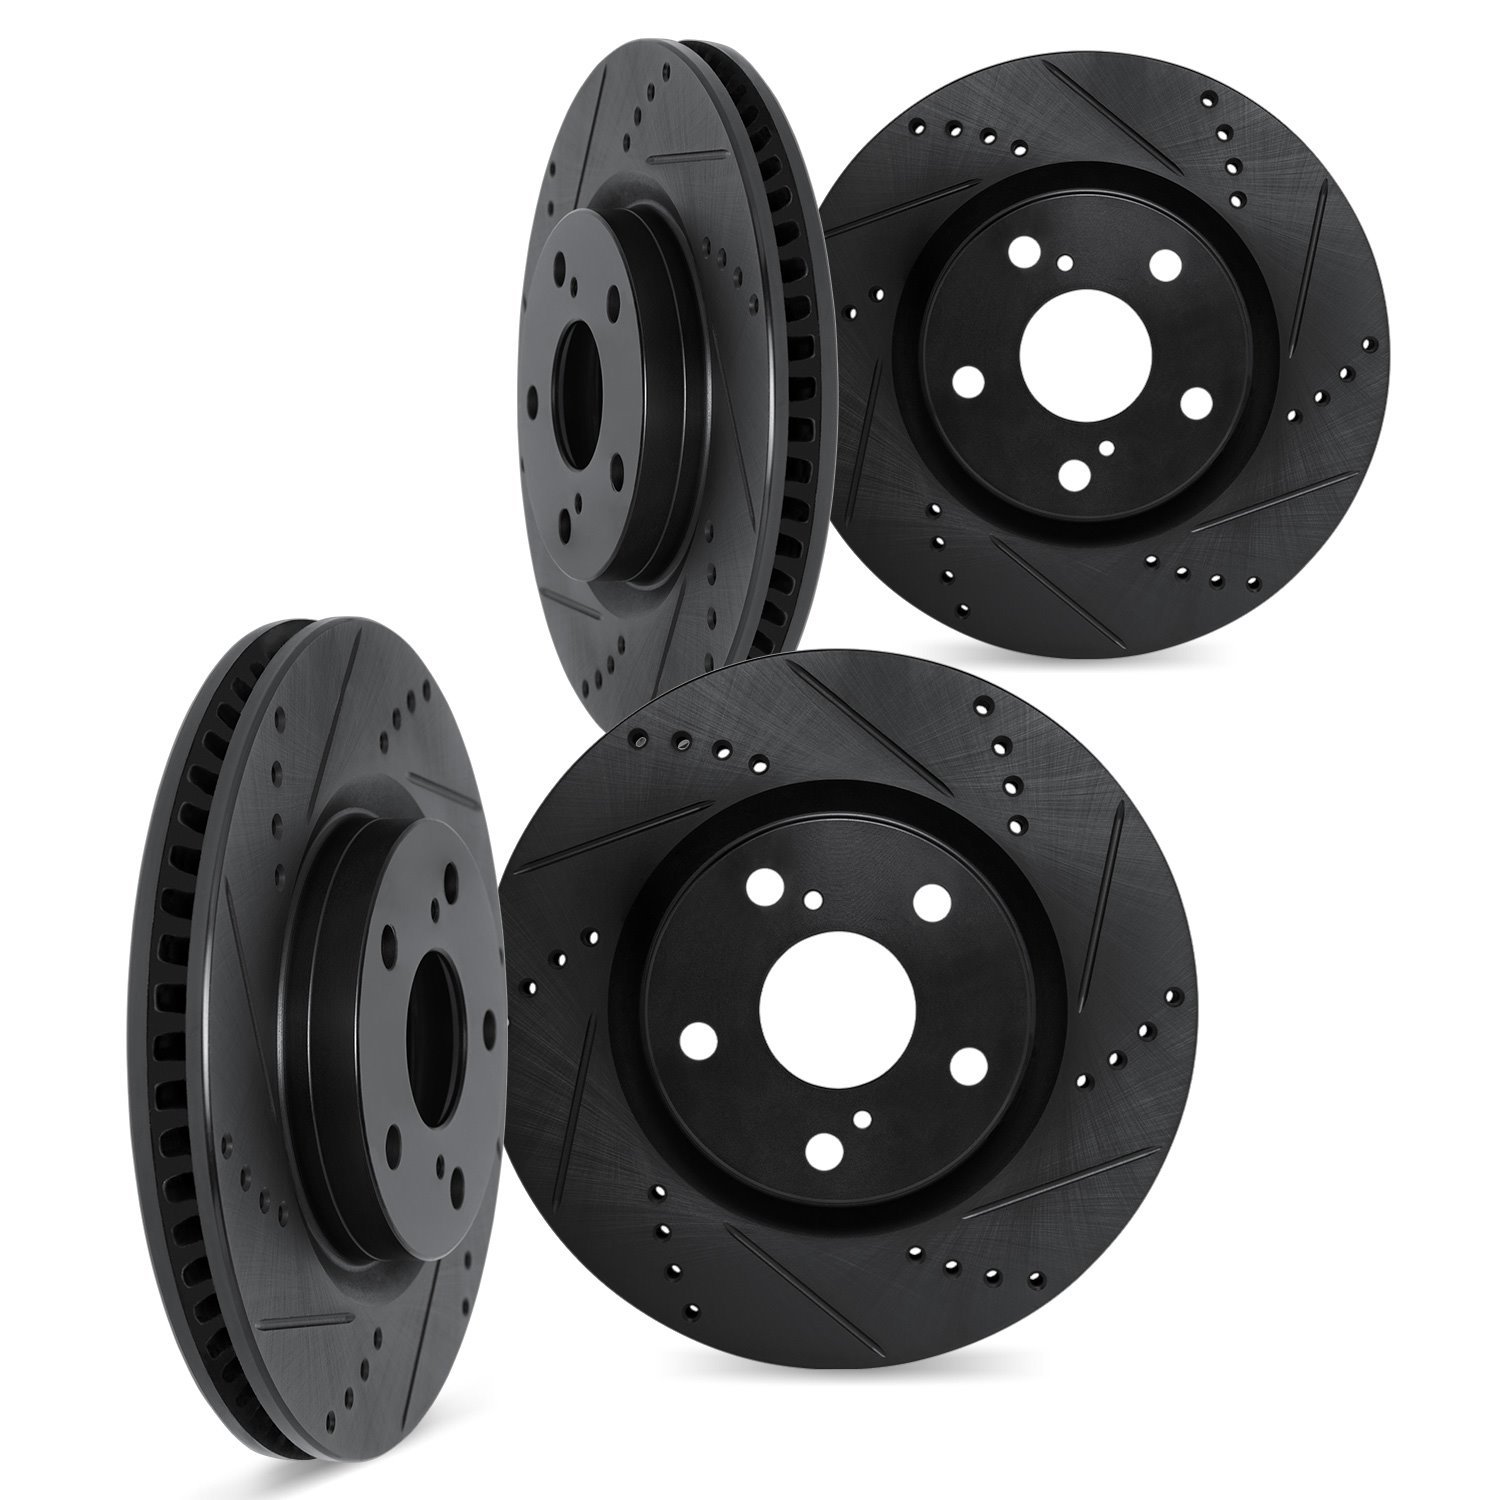 8004-02005 Drilled/Slotted Brake Rotors [Black], 1991-1994 Porsche, Position: Front and Rear